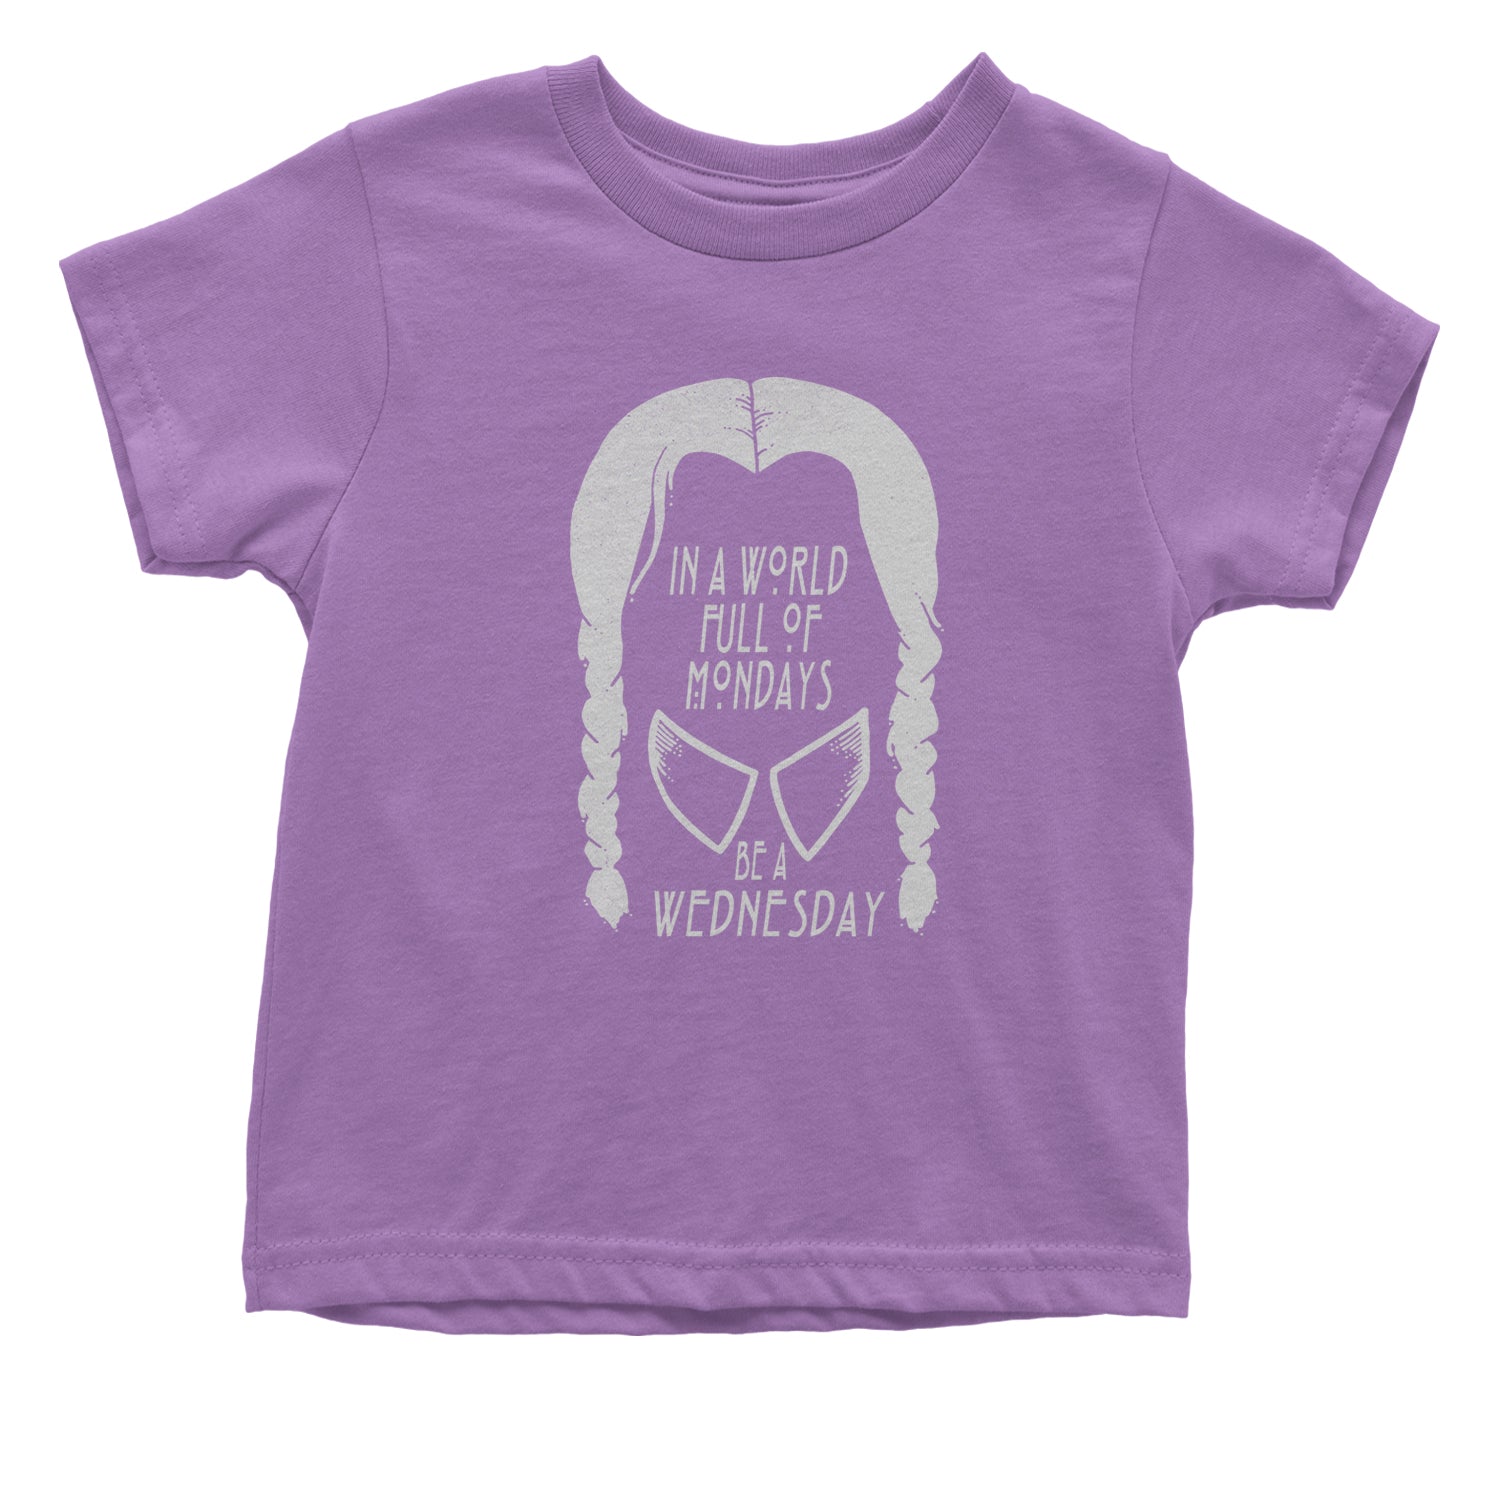 In A World Full Of Mondays, Be A Wednesday Infant One-Piece Romper Bodysuit and Toddler T-shirt academy, jericho, more, never, nevermore, vermont, Wednesday by Expression Tees